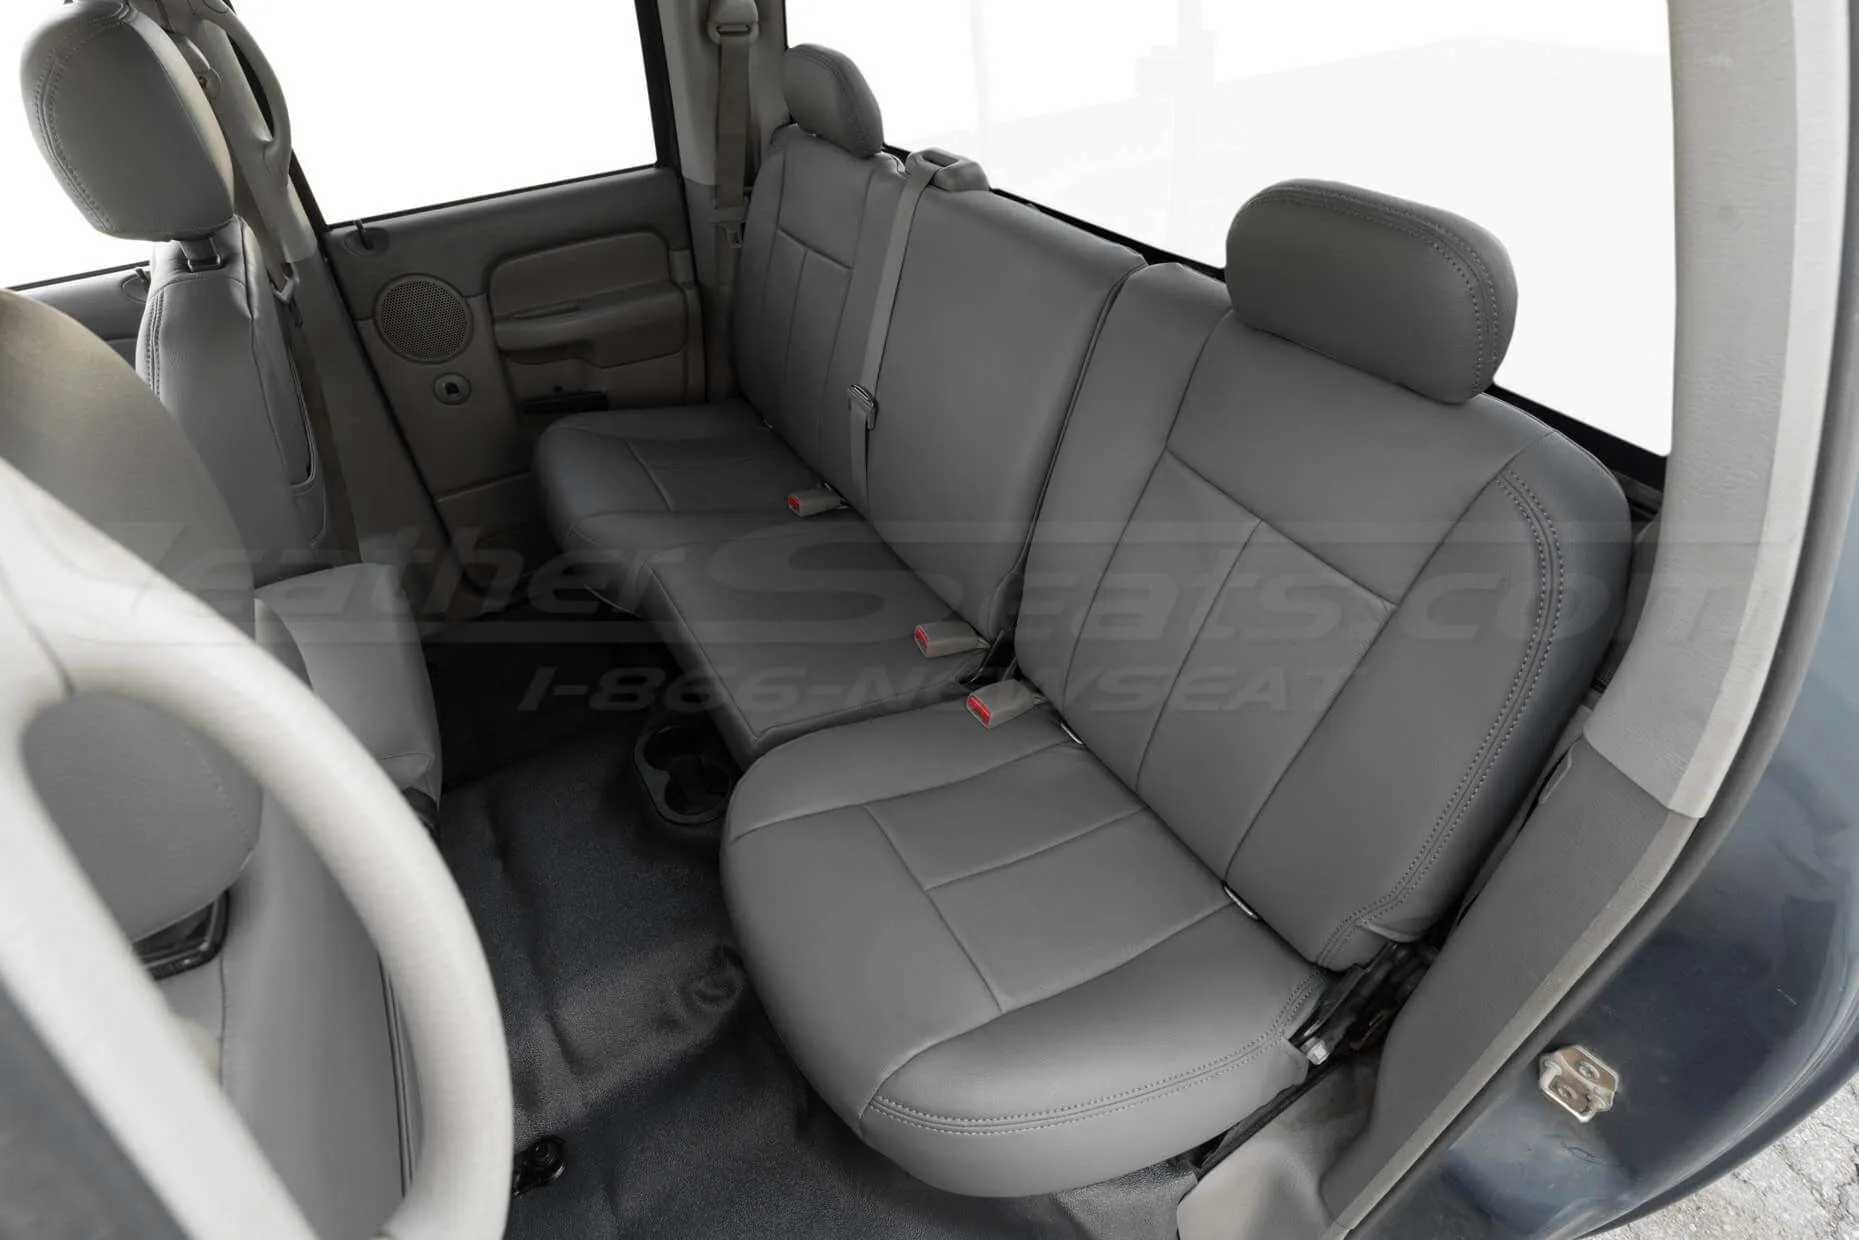 2002-2005 Dodge Ram Quad Cab with Installed 60/40 Rear Seats in Light Grey